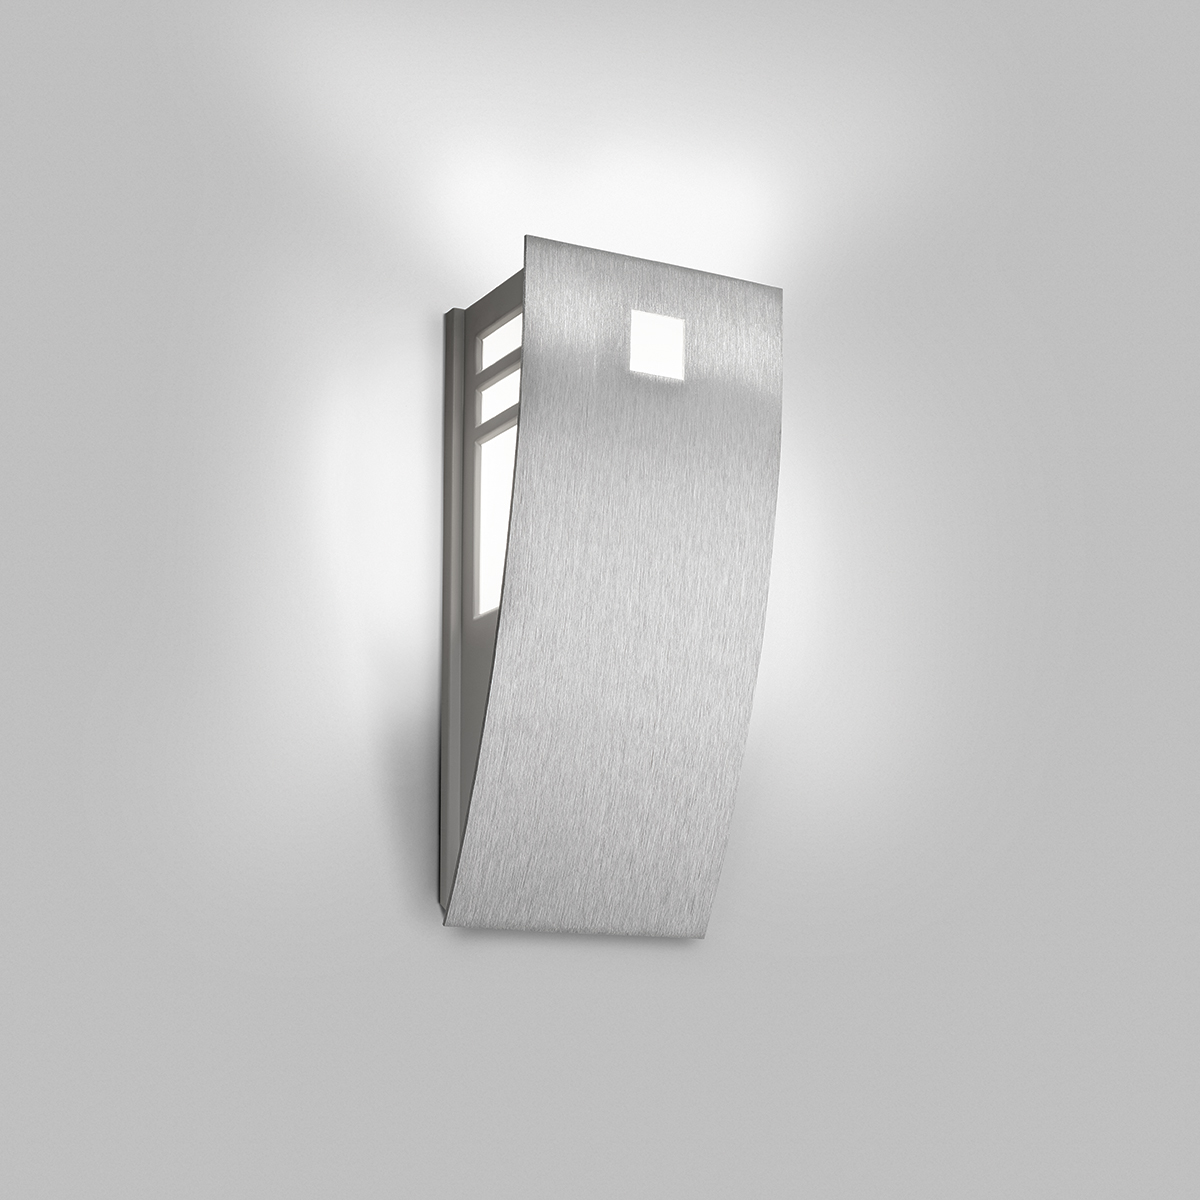 A wedge-shaped curved wall sconce with cutout accents in its solid body and uplighting